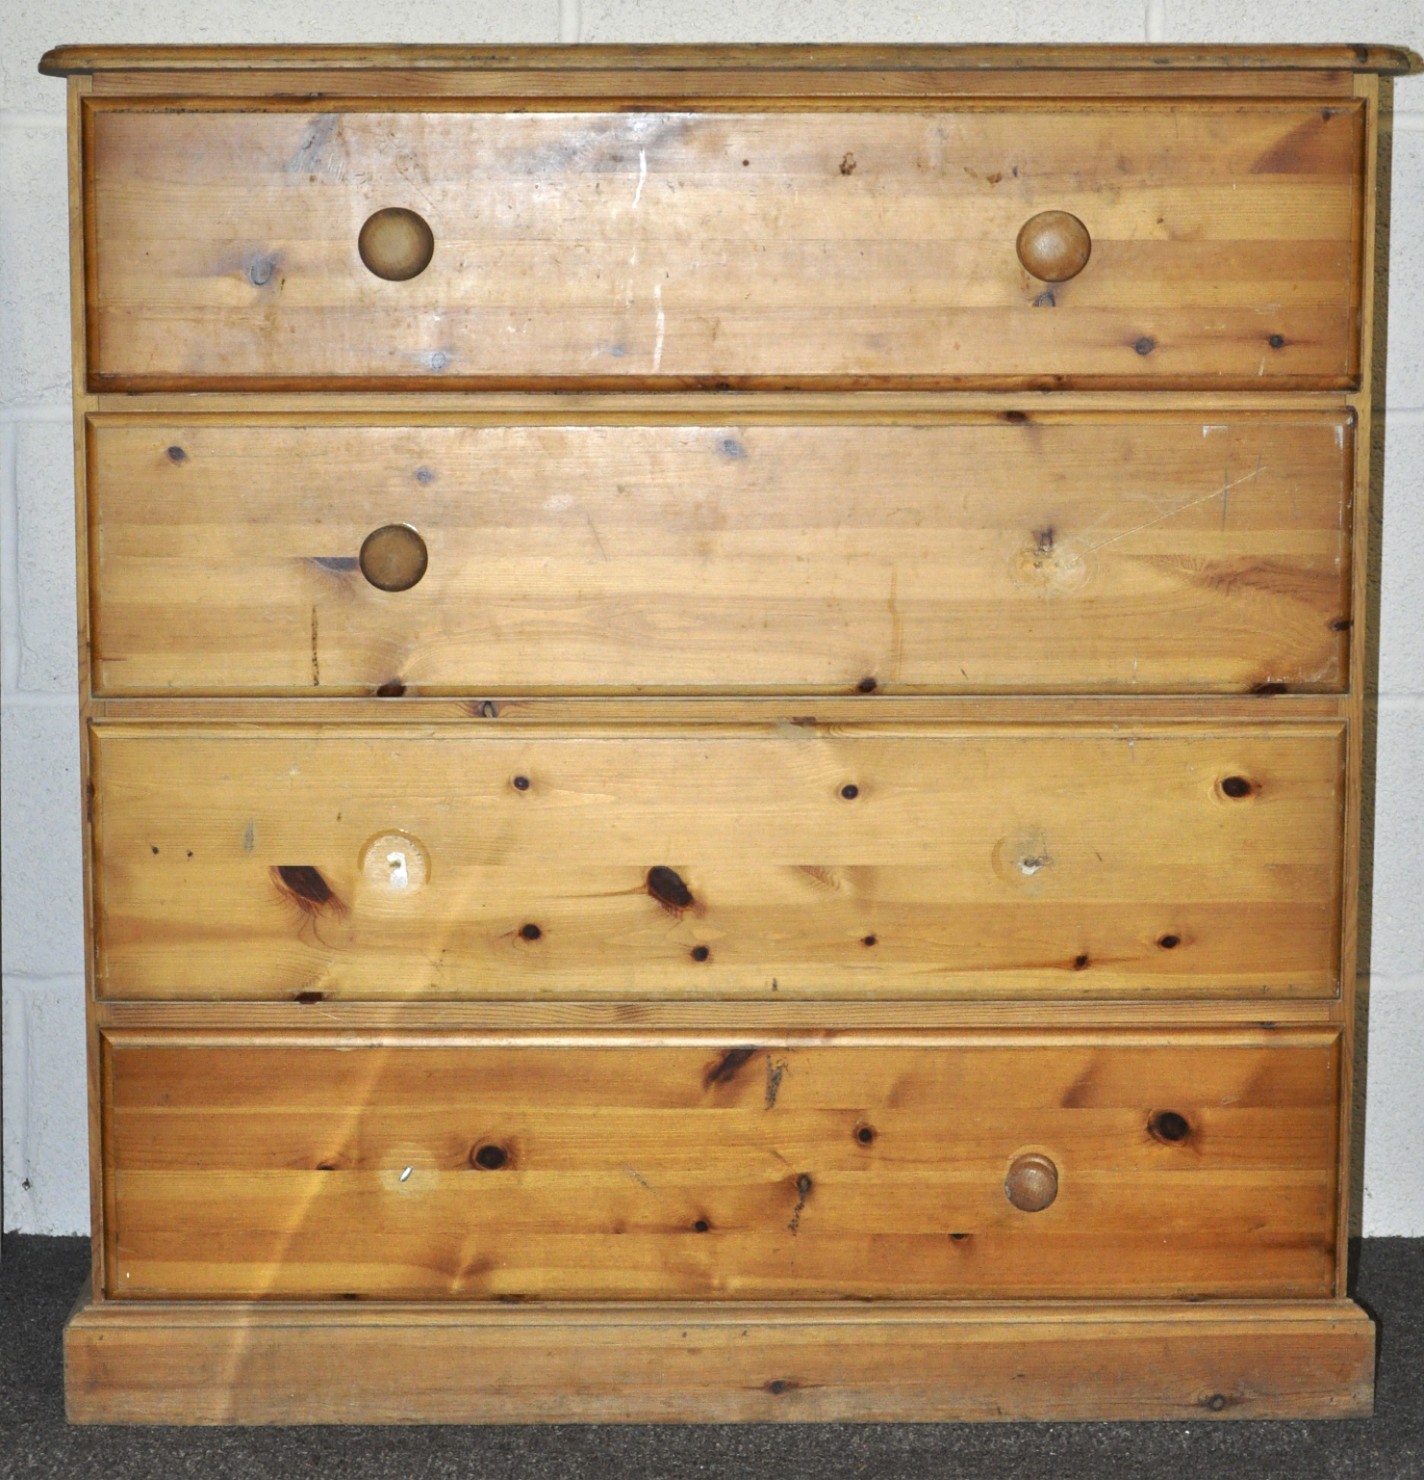 A pine chest of drawers having a run of four drawers, raised on a plinth base.